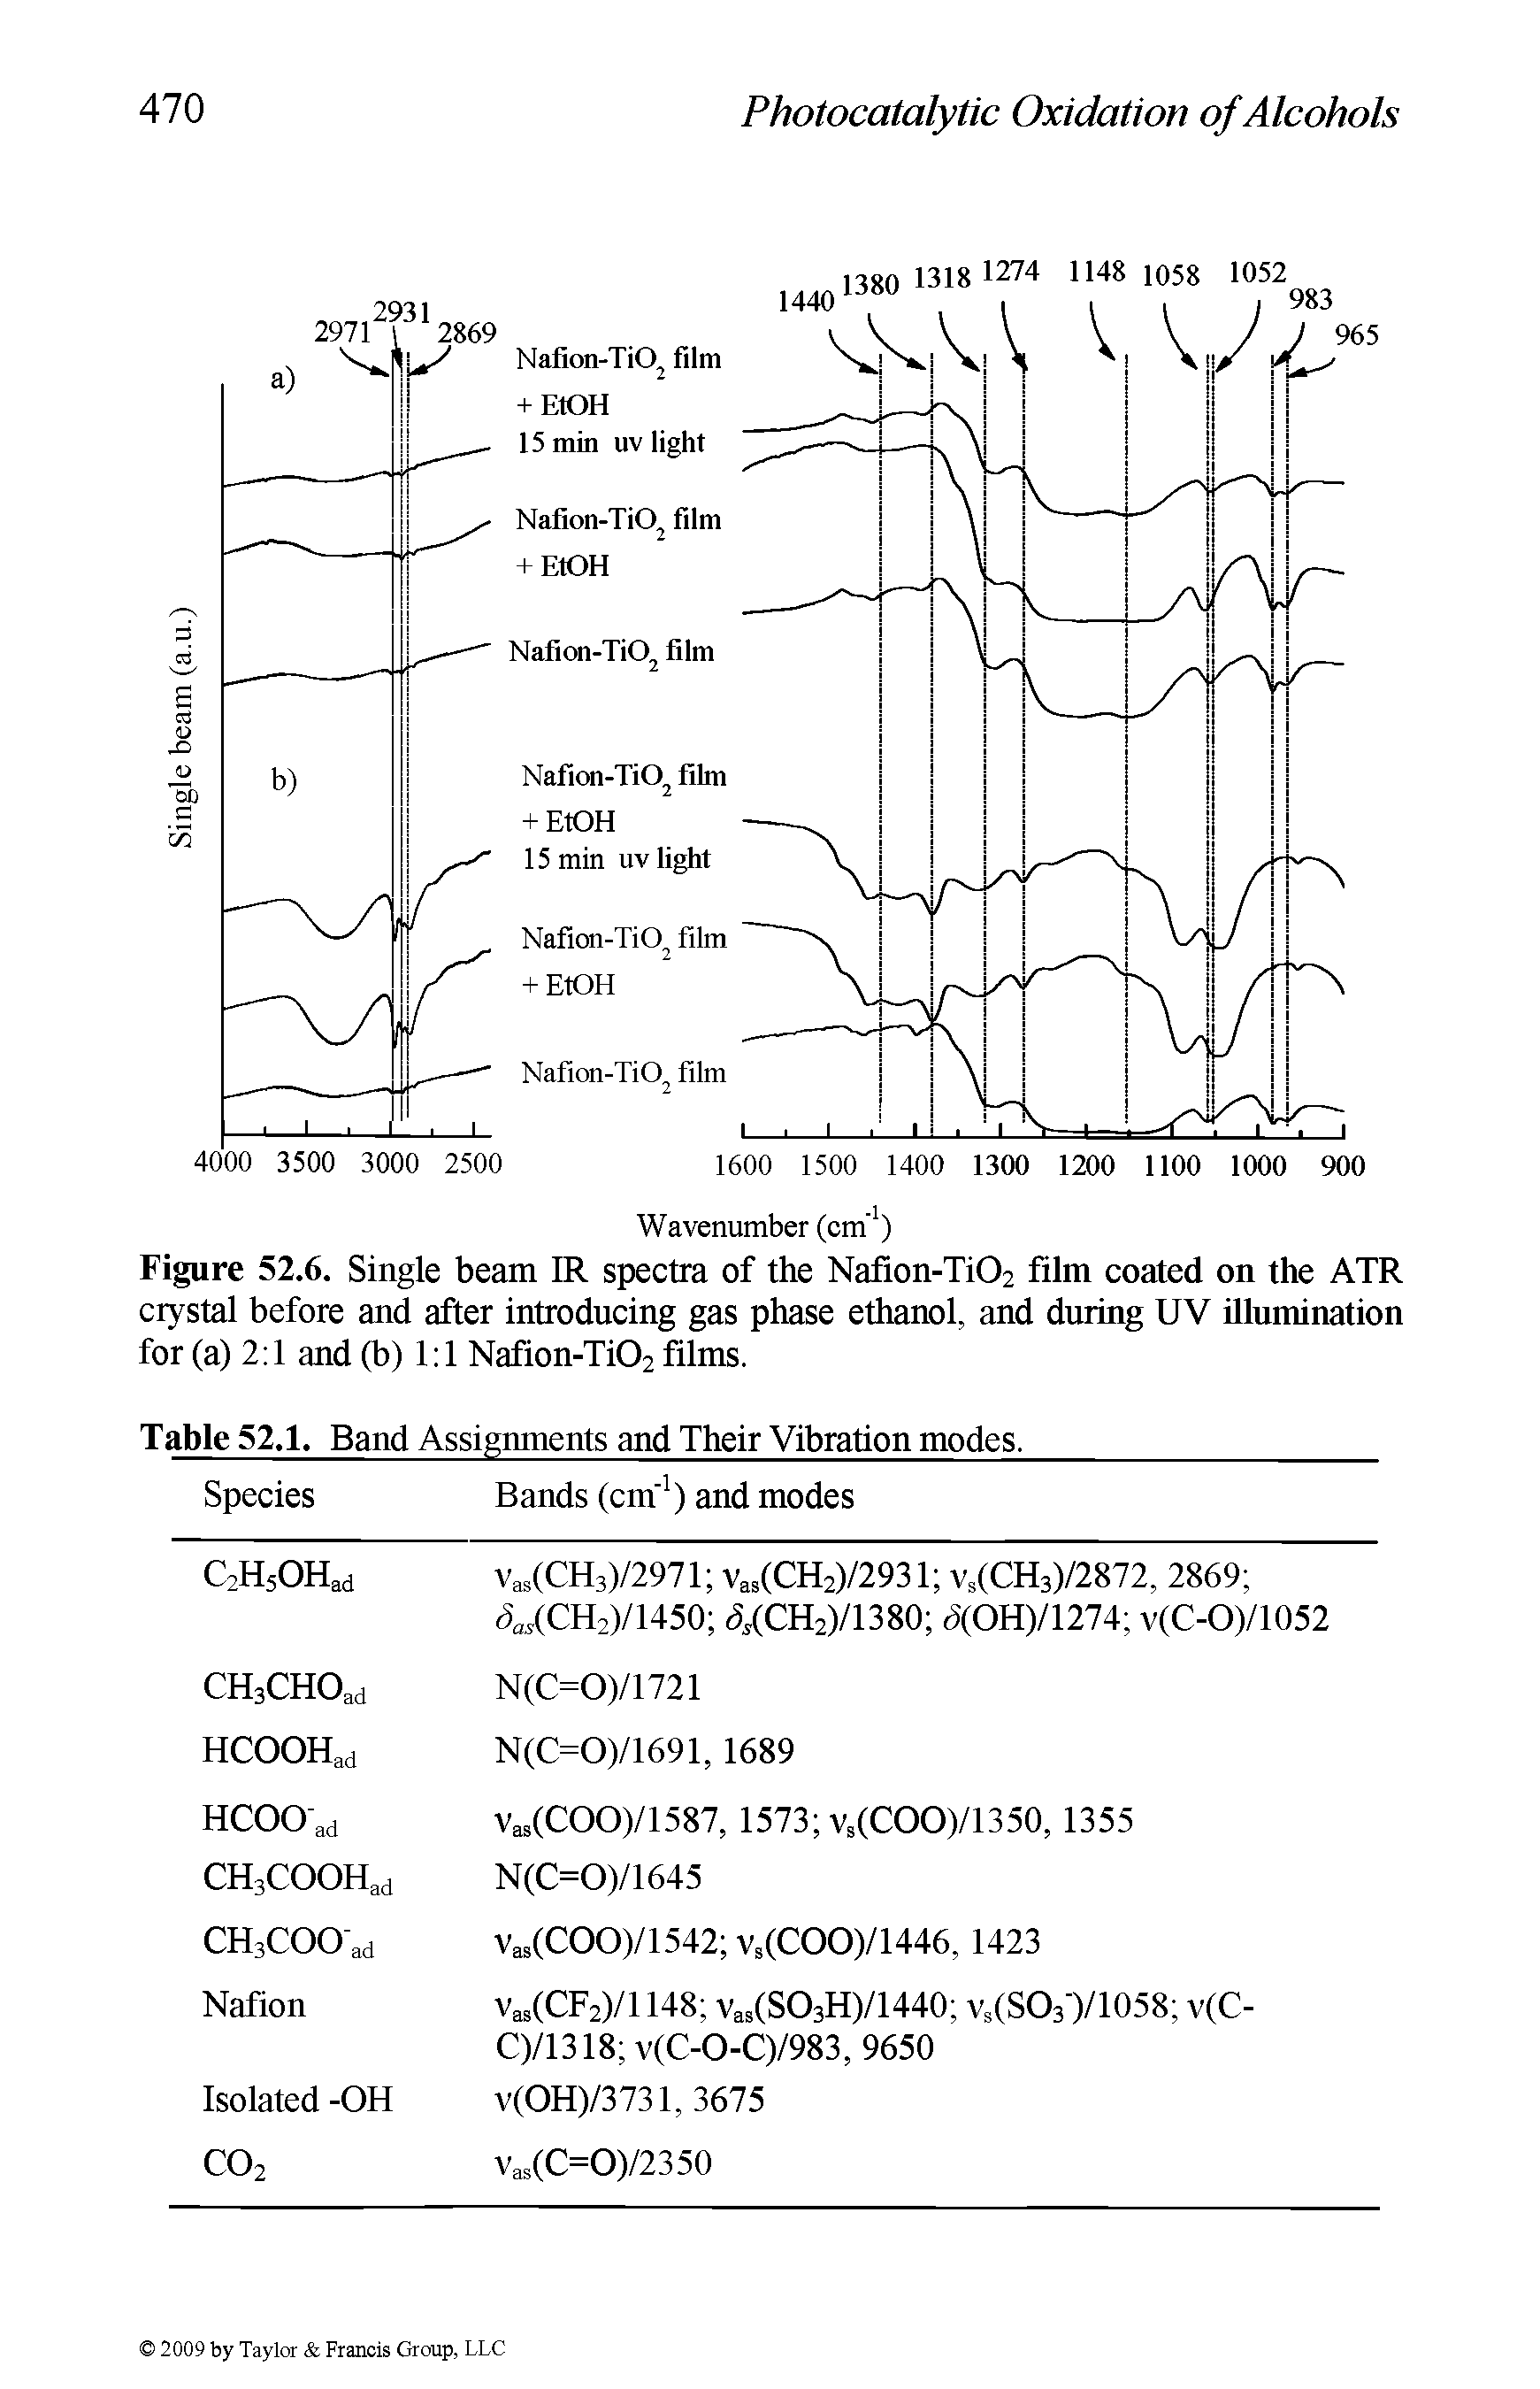 Table 52.1. Band Assignments and Their Vibration modes.